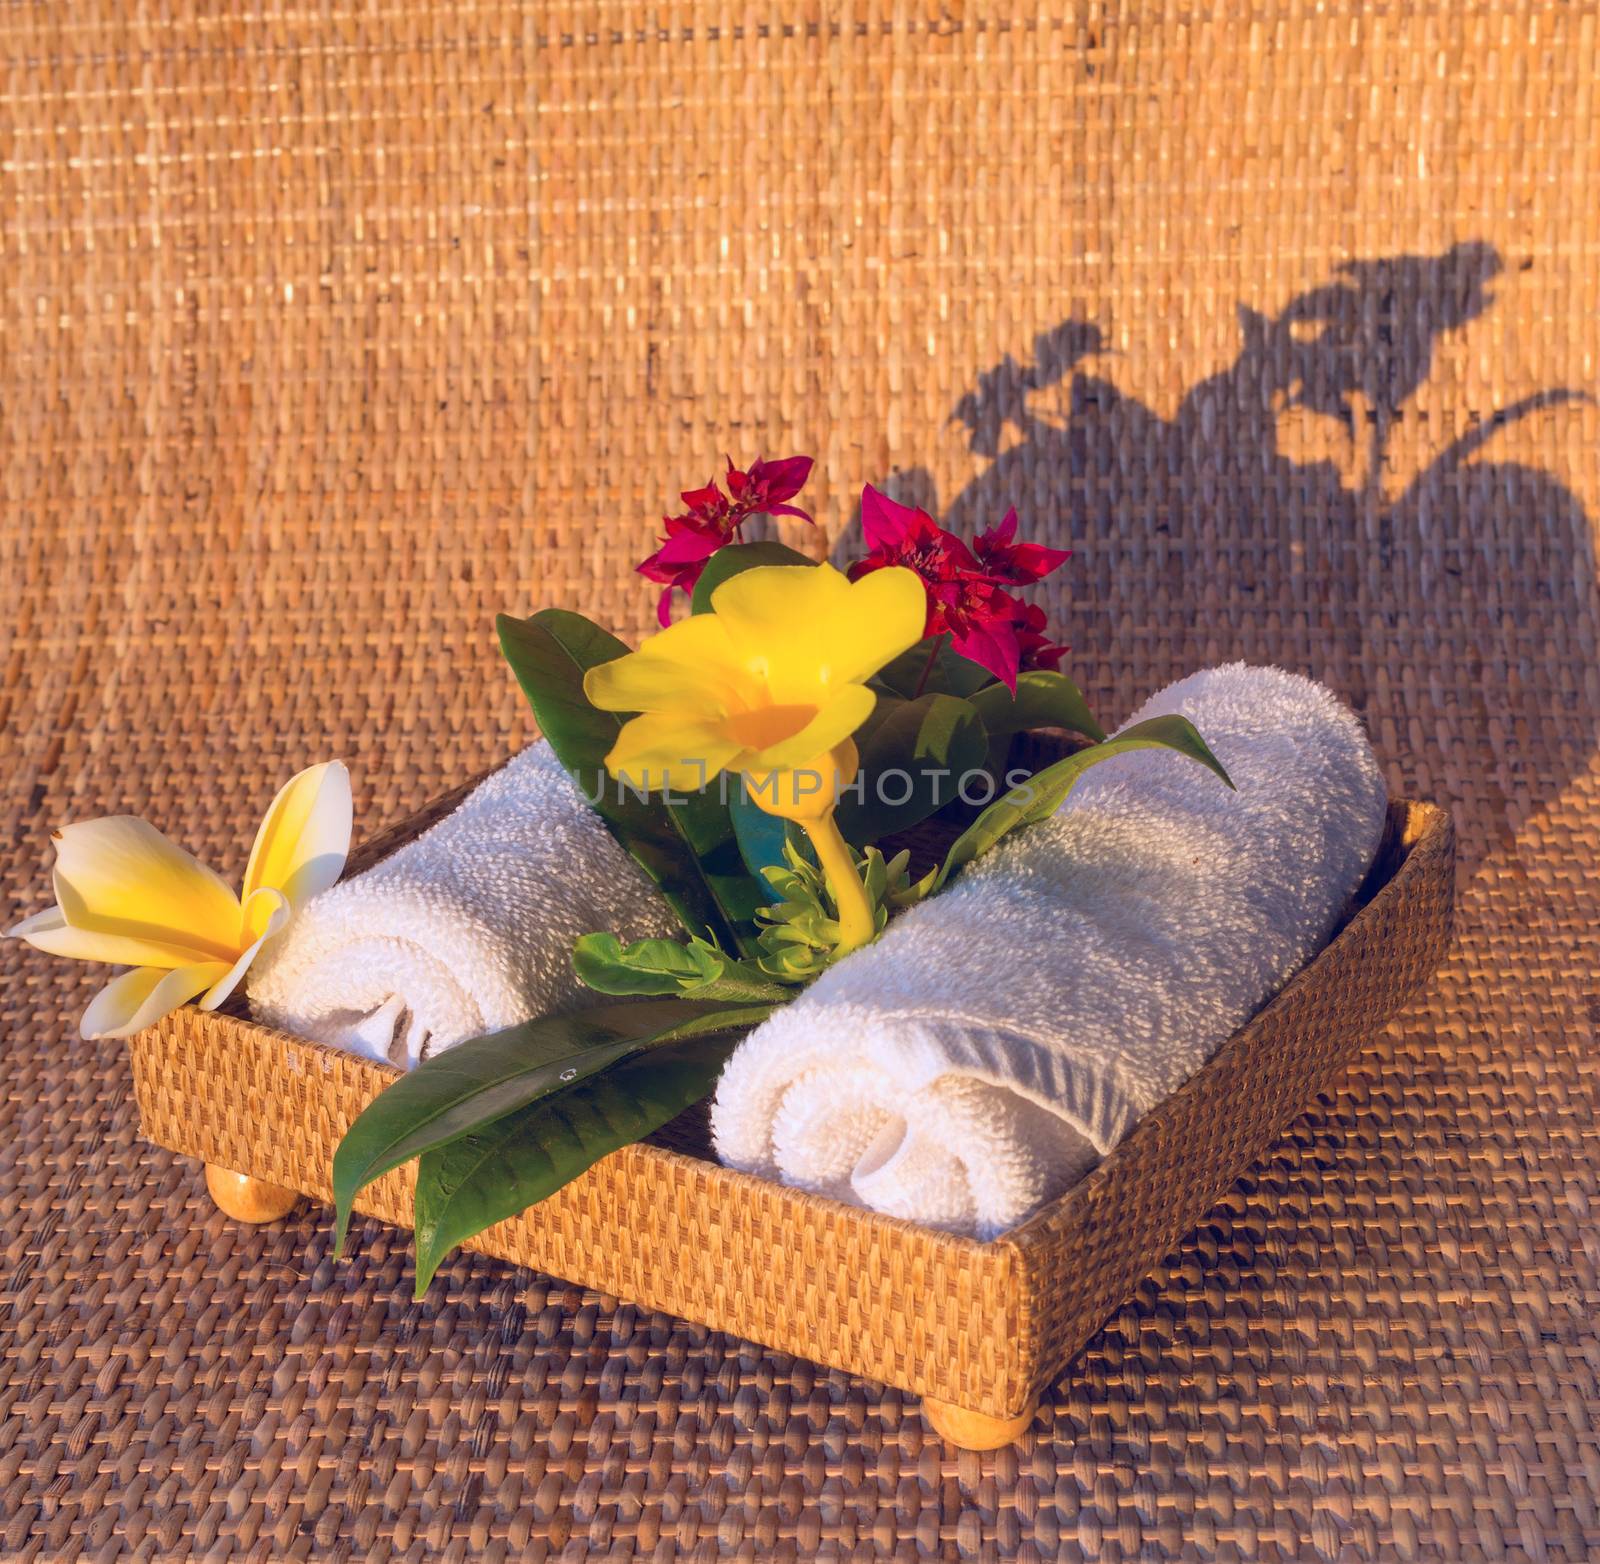 Towels with red yelow and white flowers